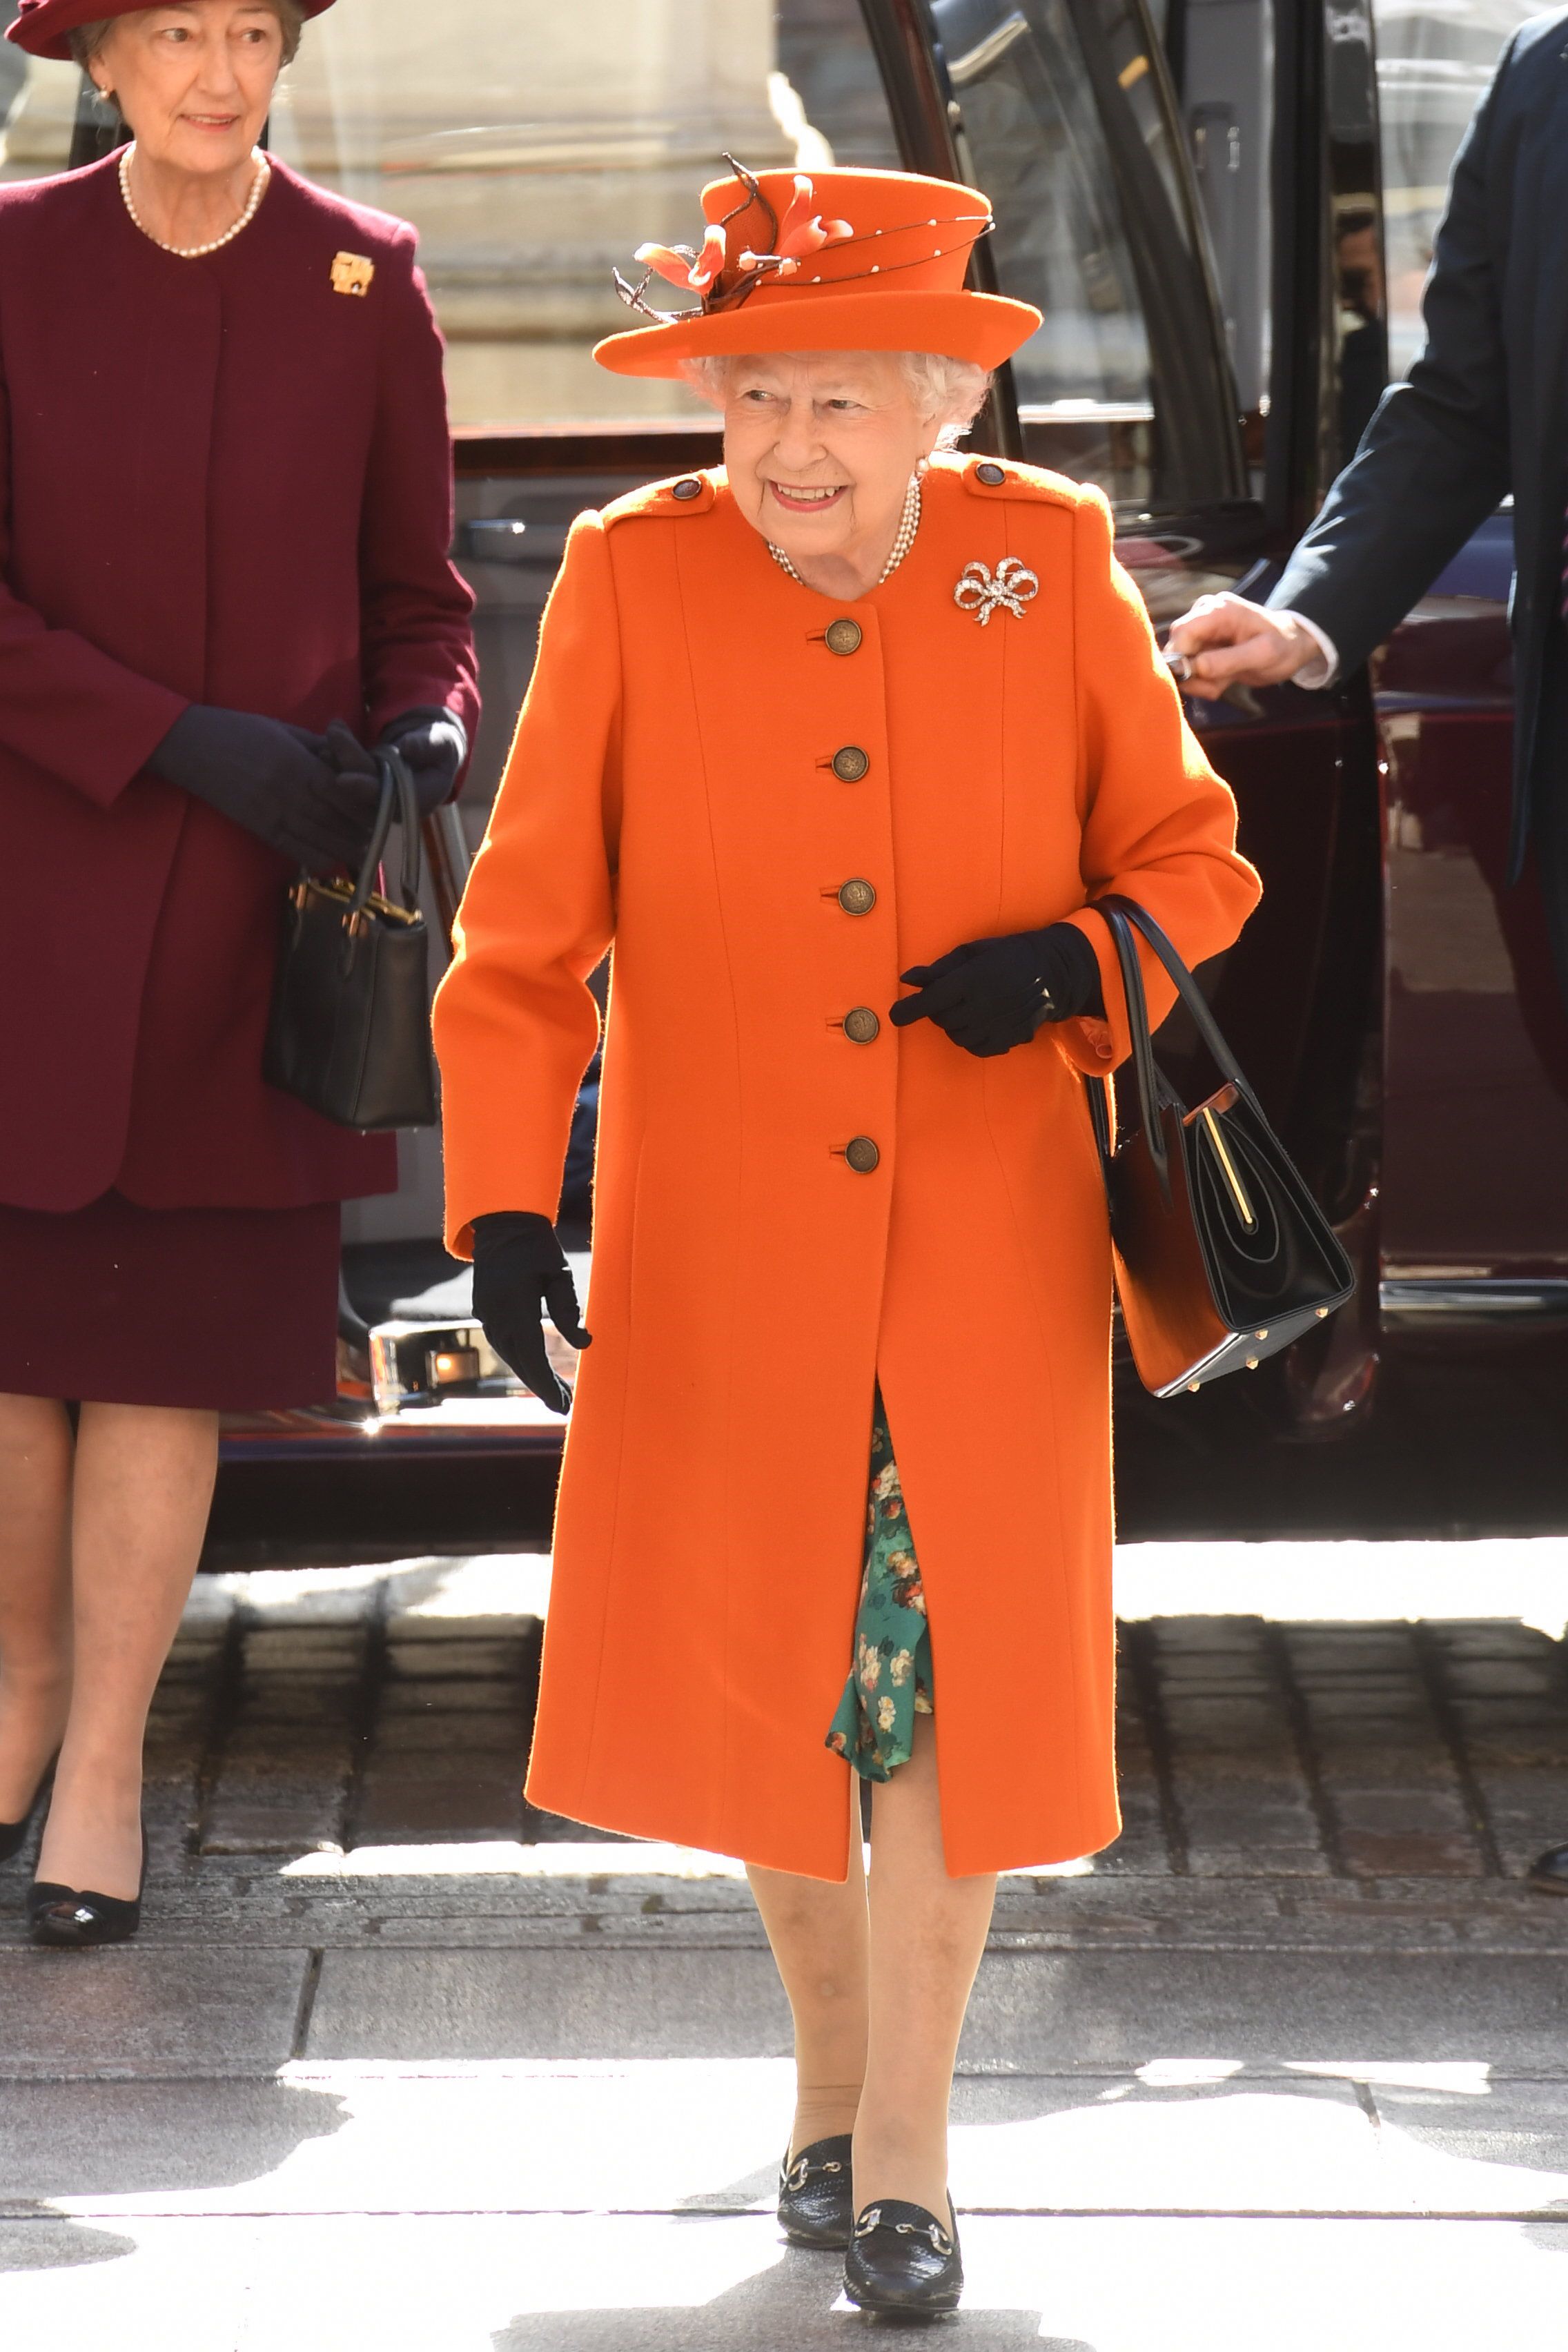 The real reason the Queen always carried a Launer handbag